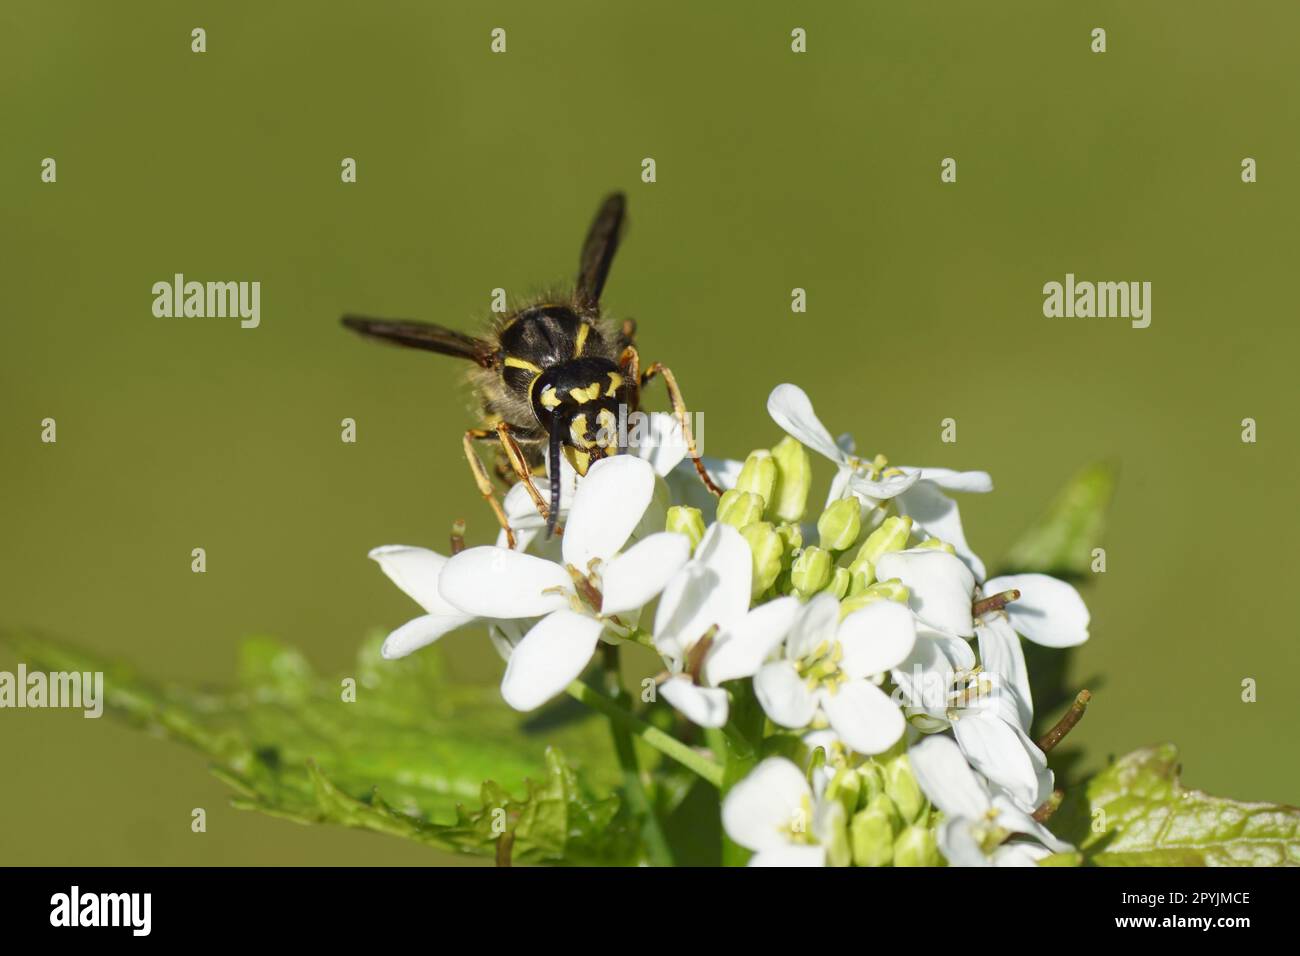 Close up face of a queen of a common wasp (Vespula vulgaris), family Vespidae. On flowers of garlic mustard (Alliaria petiolata). Spring, May. Stock Photo